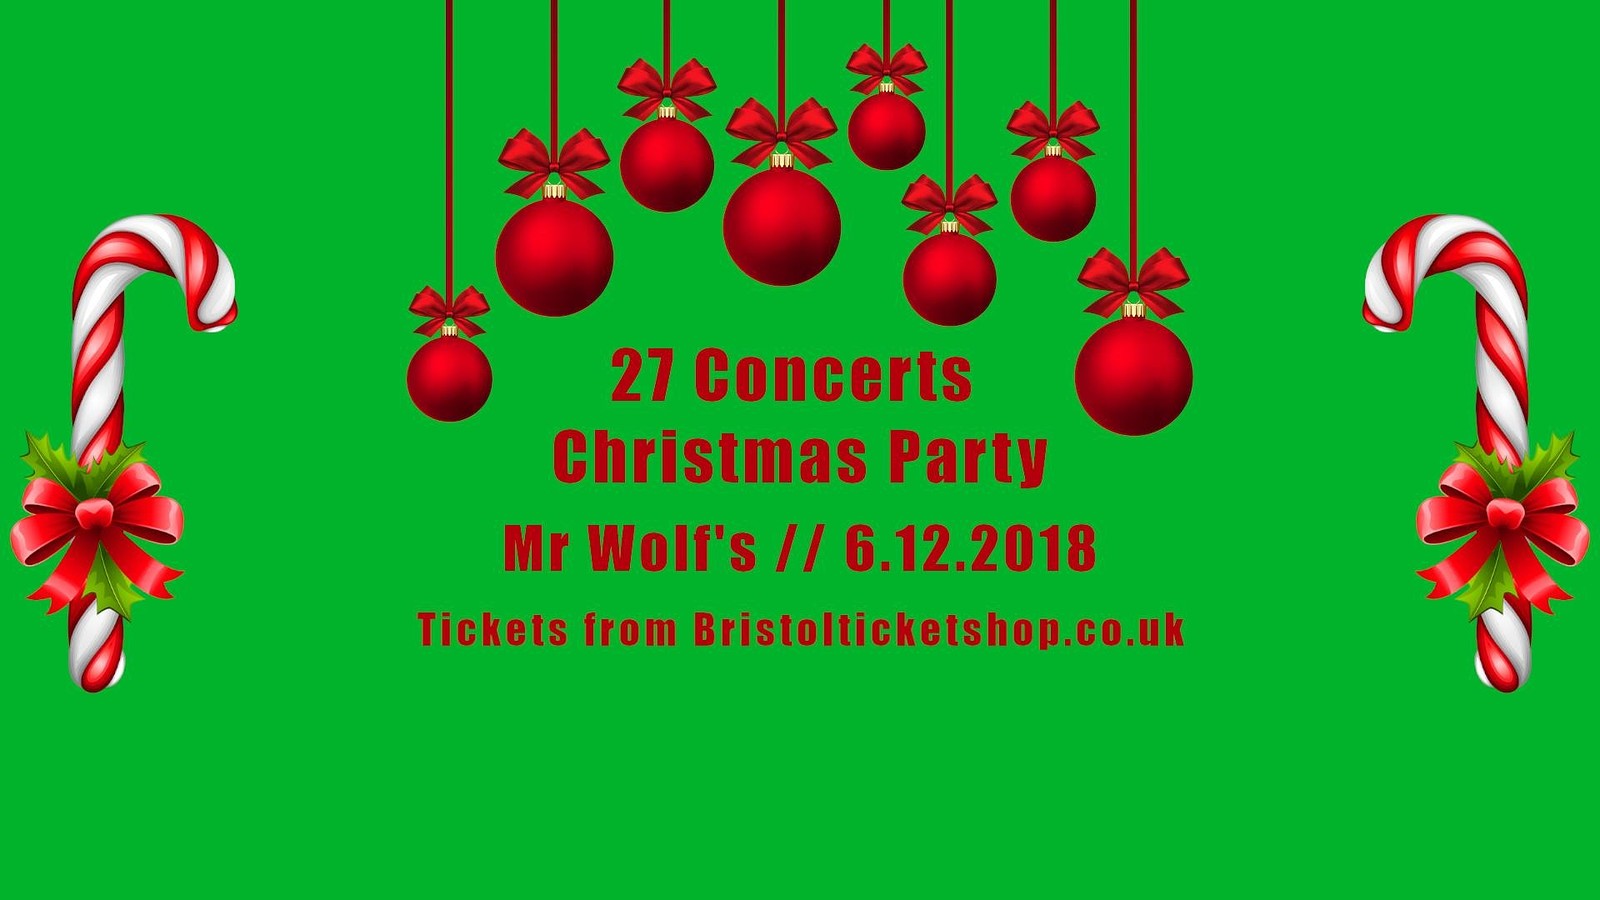 27 Concerts Christmas Party at Mr Wolfs